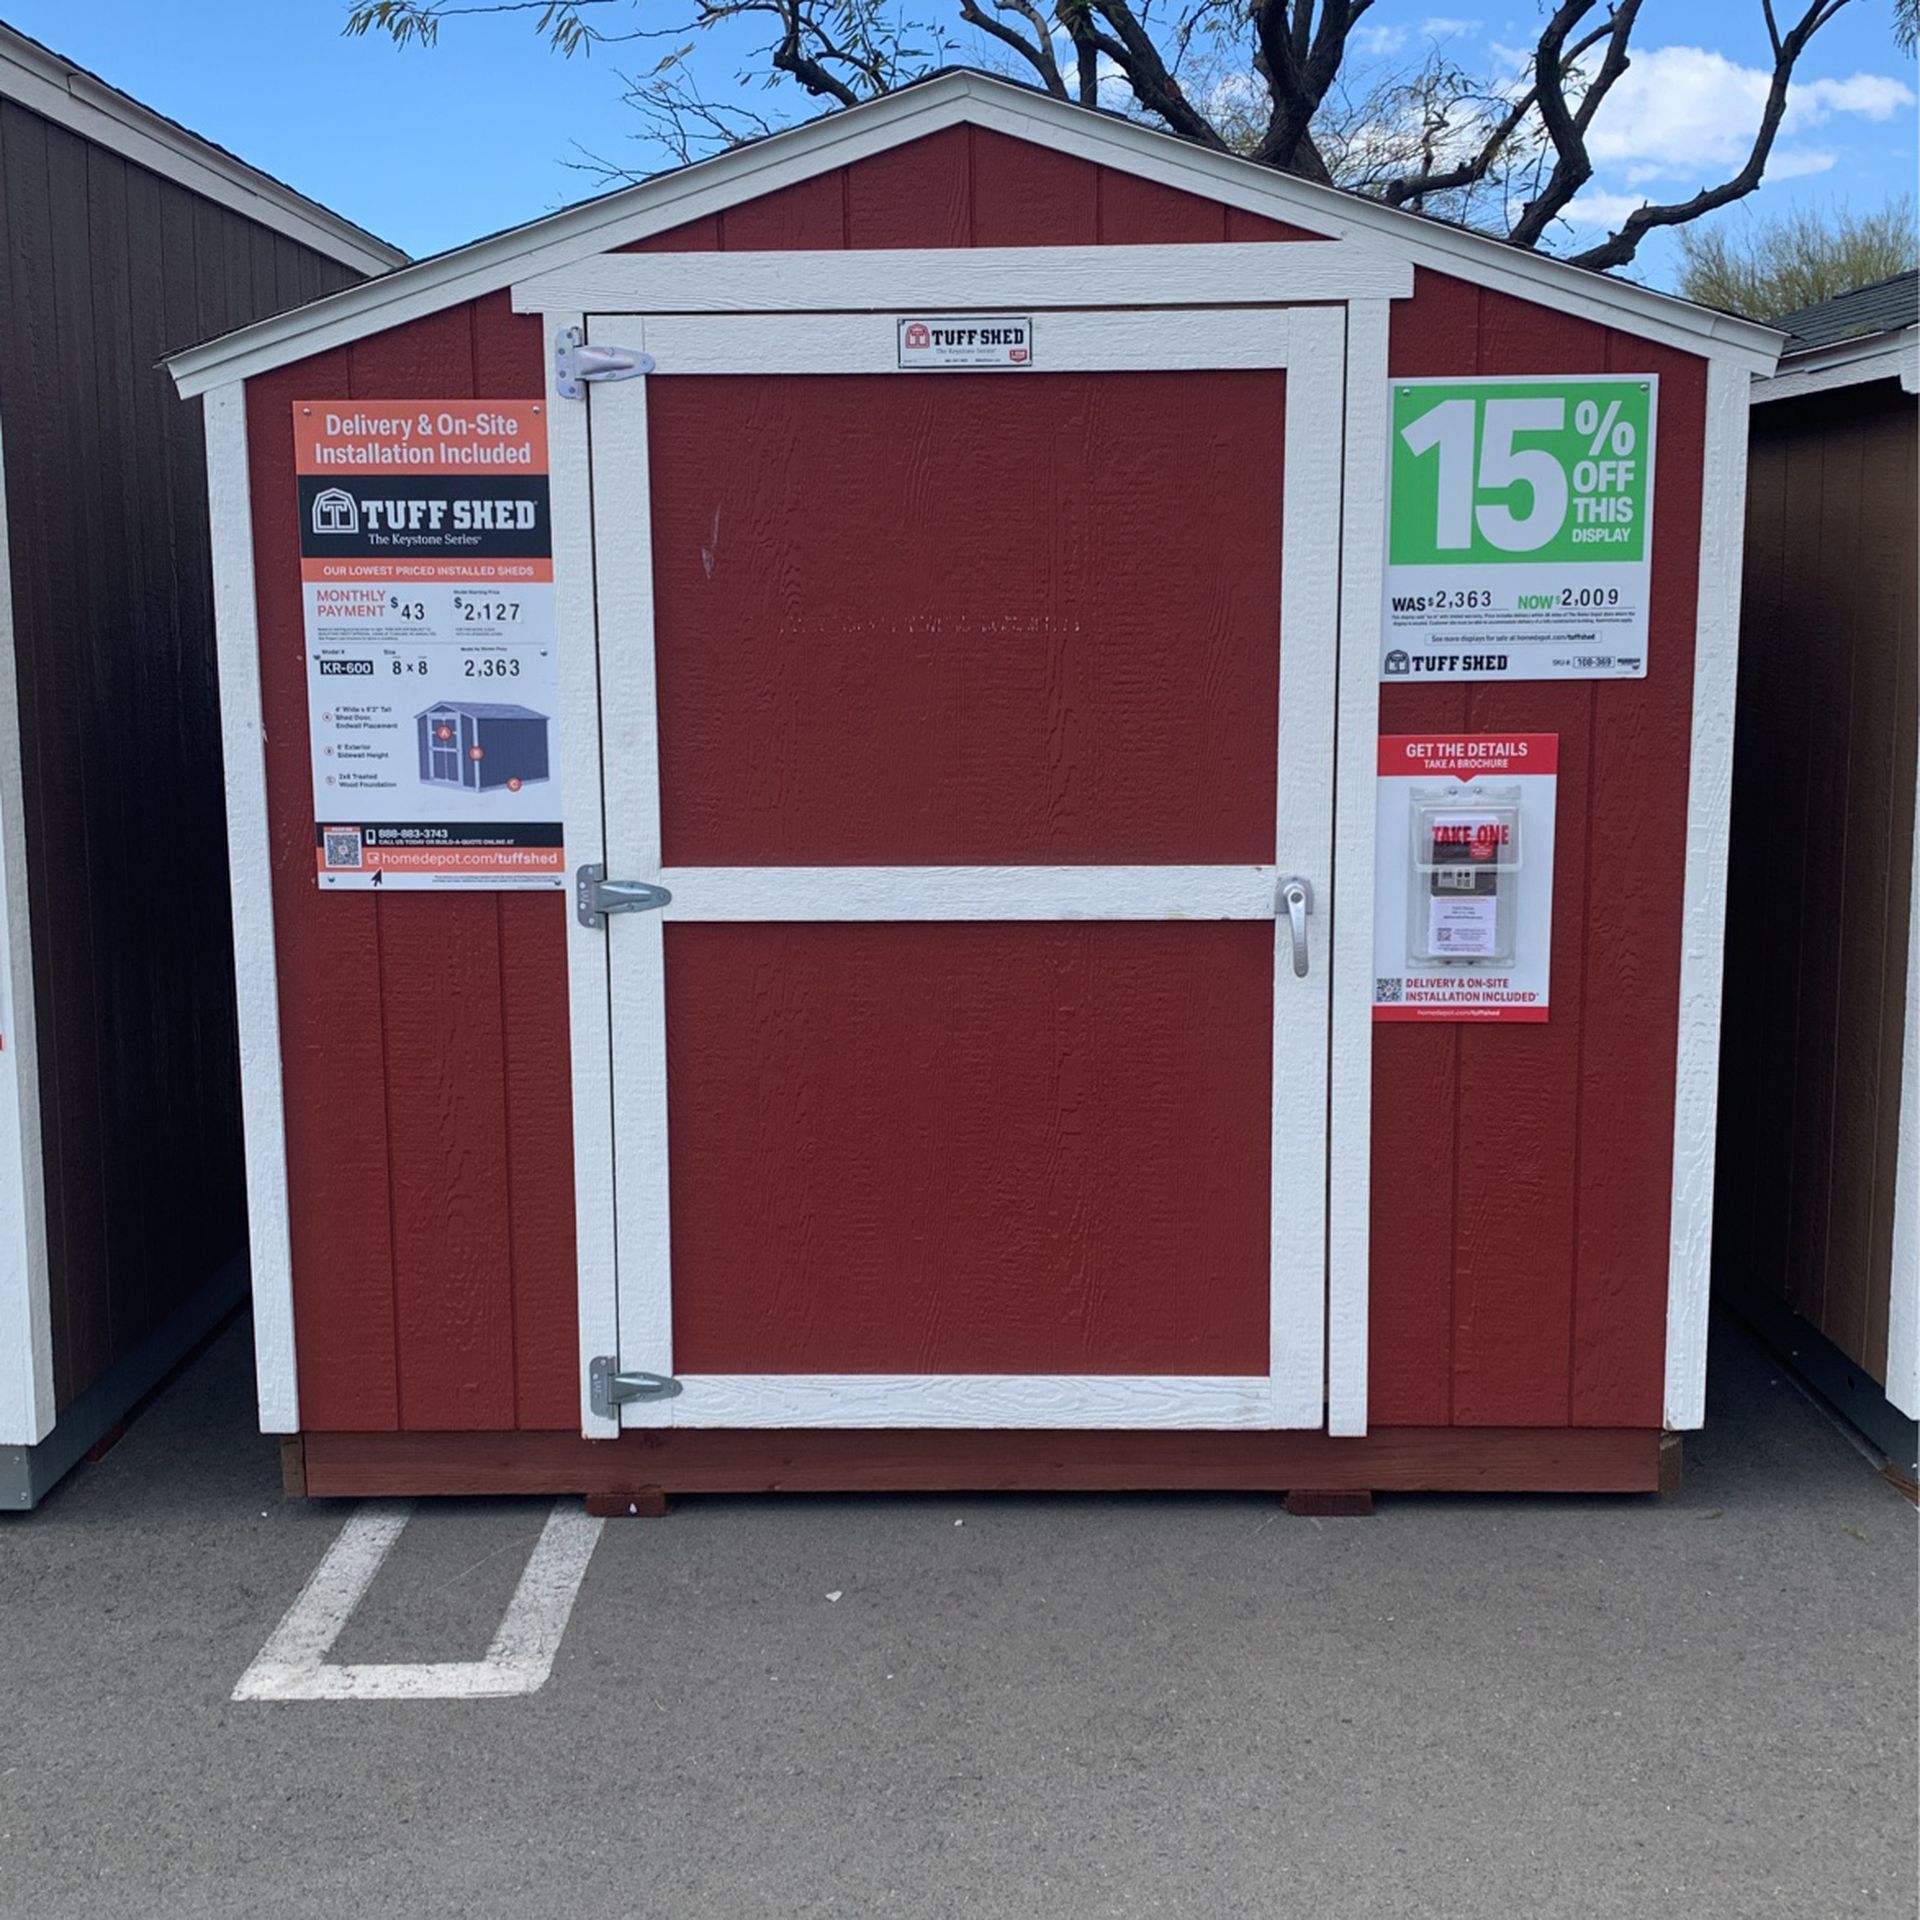 Tuff Shed Keystone KR-600 8x8 Was $2,363 Now $2,009 15% Off Financing Available!